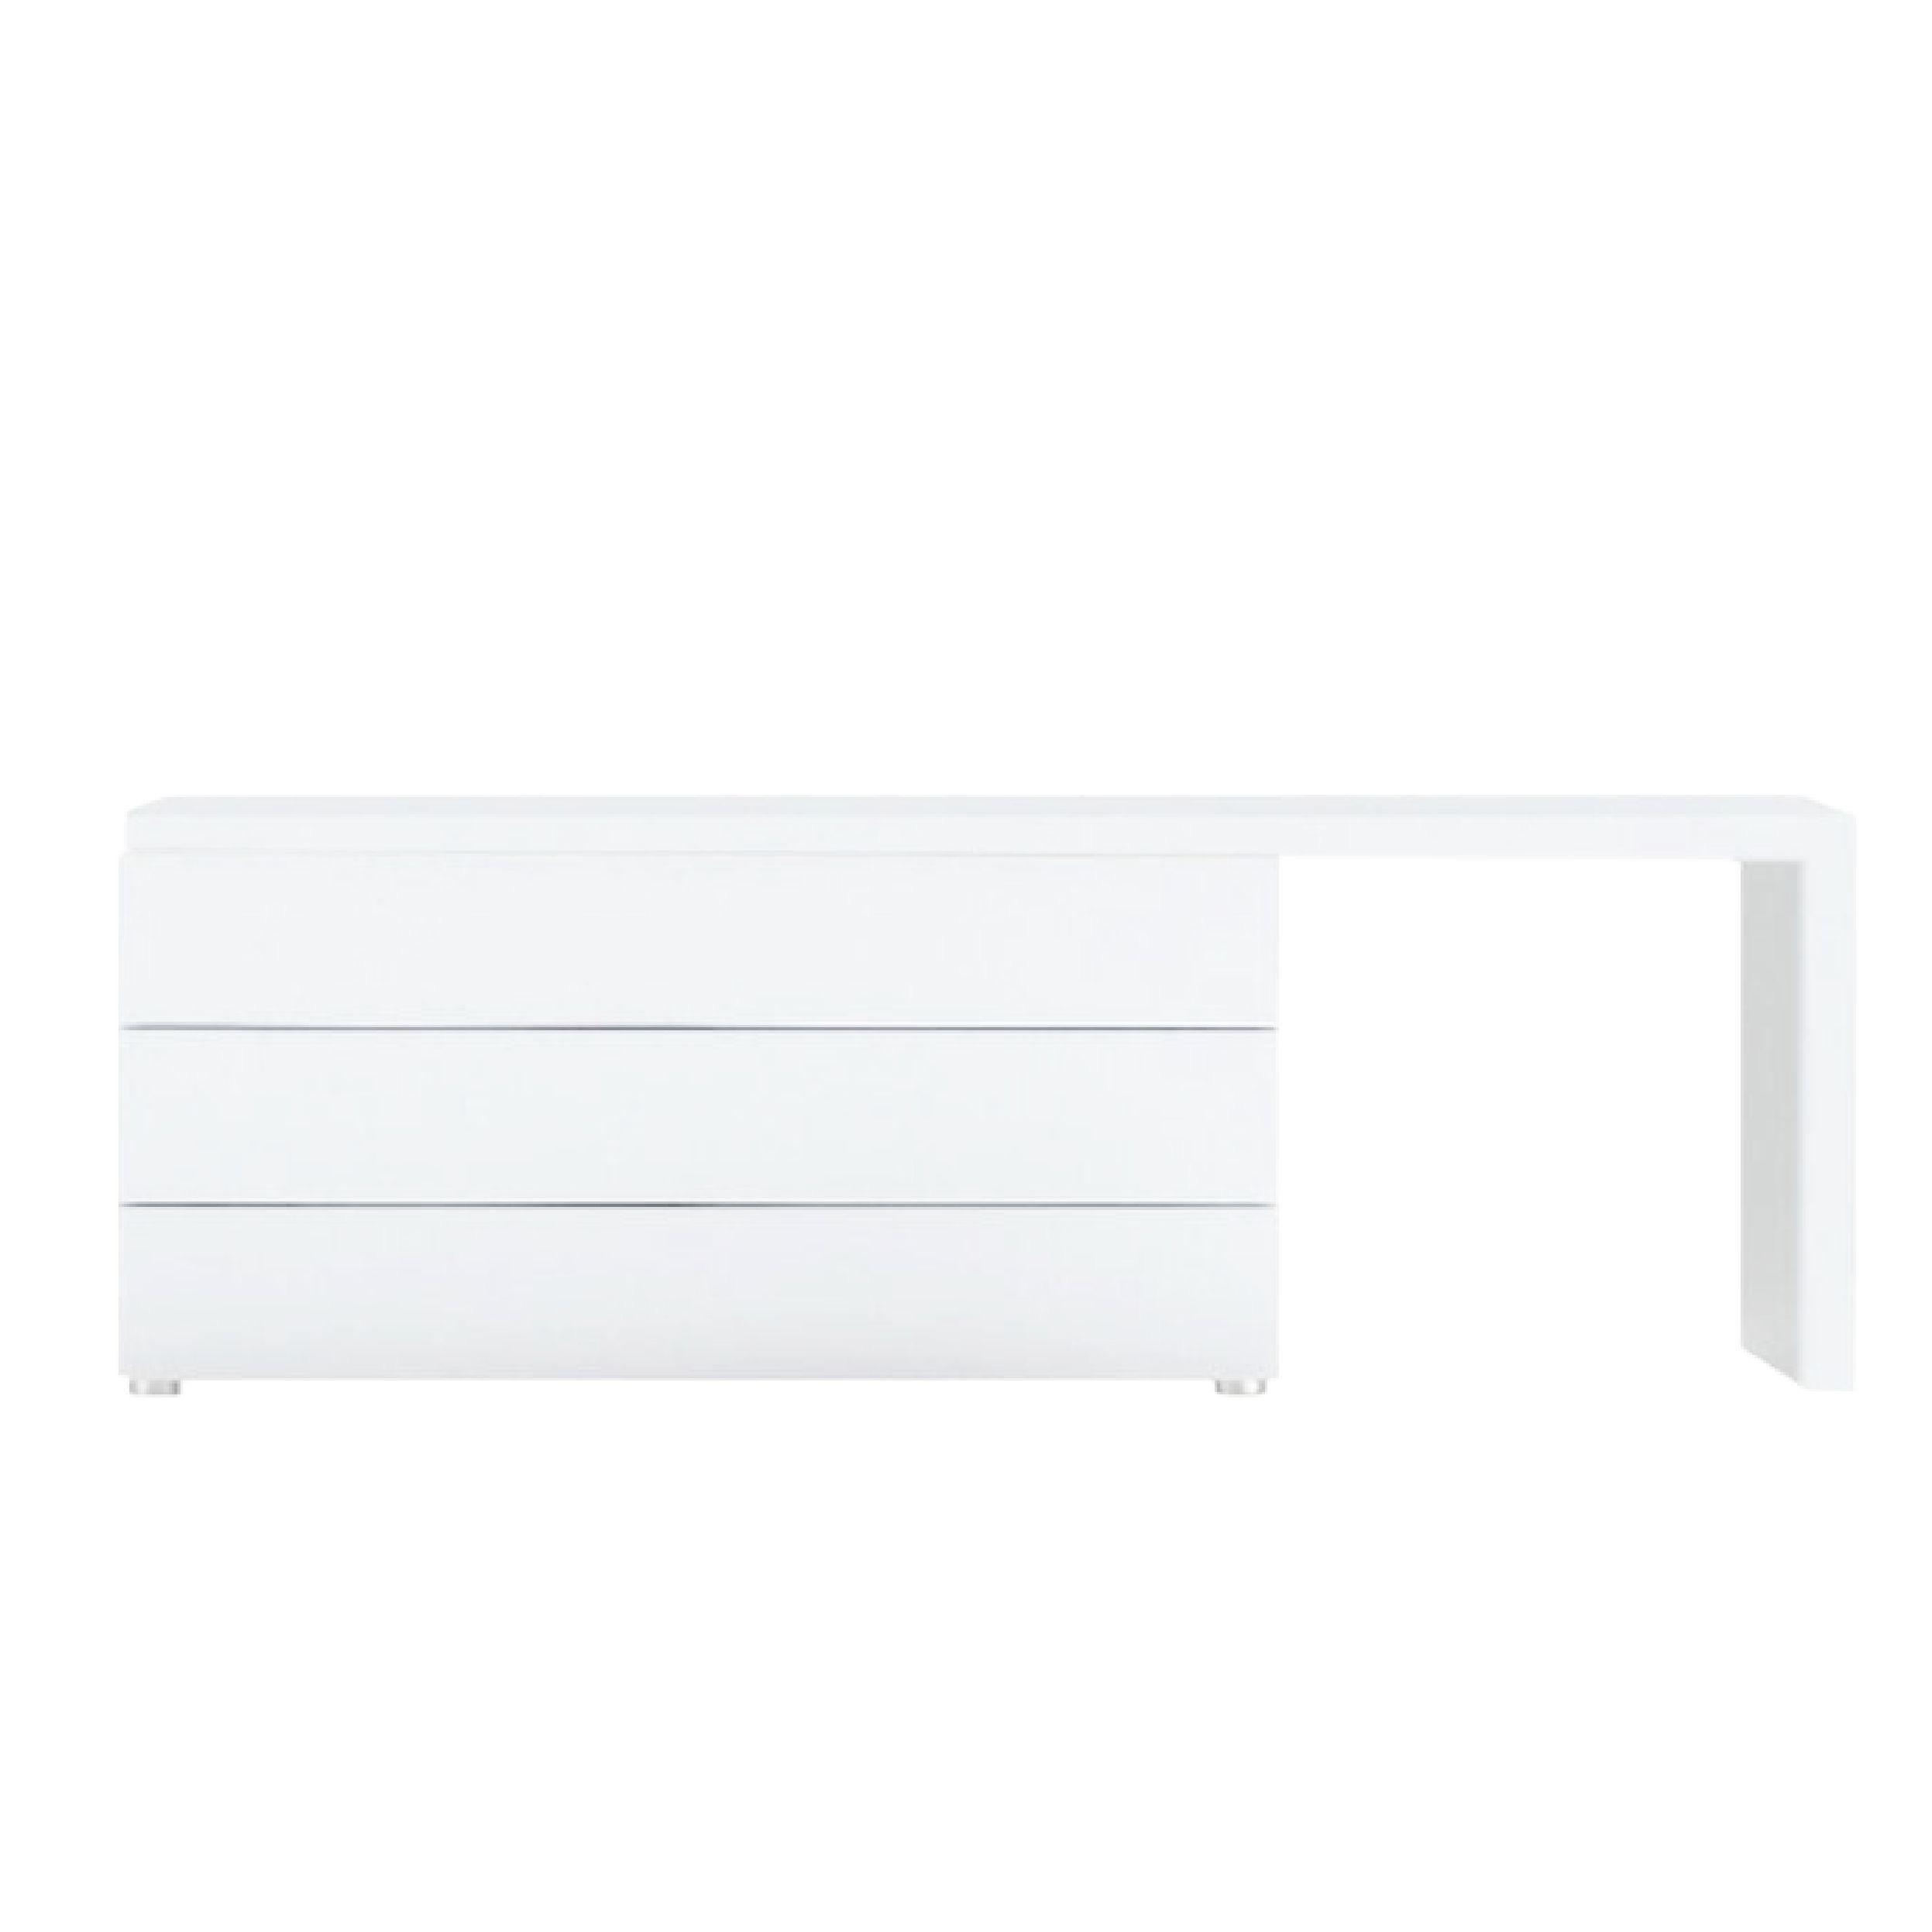 Lacquered Poliform Italy Dream Collection White Lacquer Modular Dresser with Table, Desk